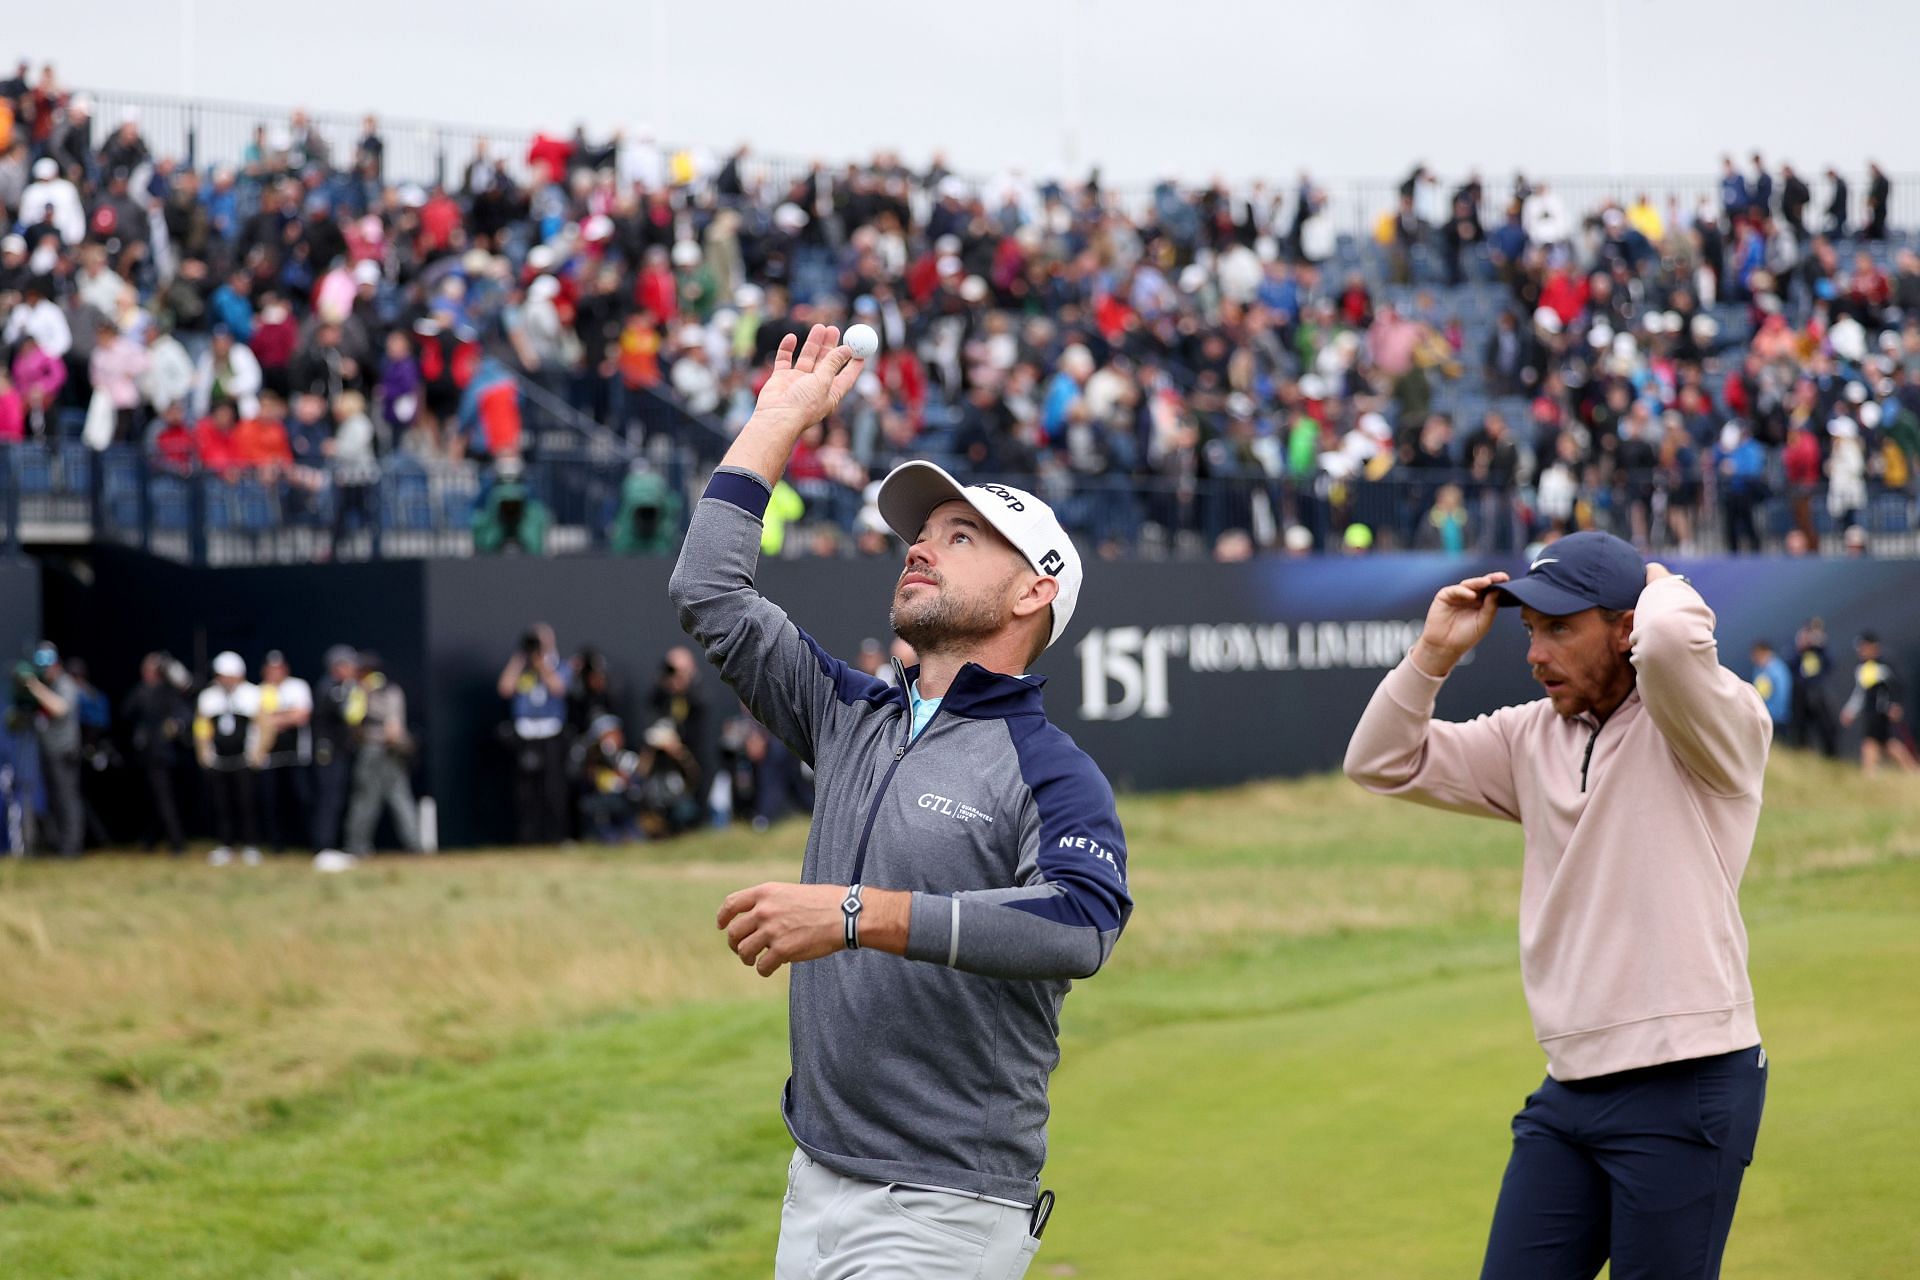 Brian Harman throws his match ball into the crowd after finishing on the 18th green at the Open Championship, day 3